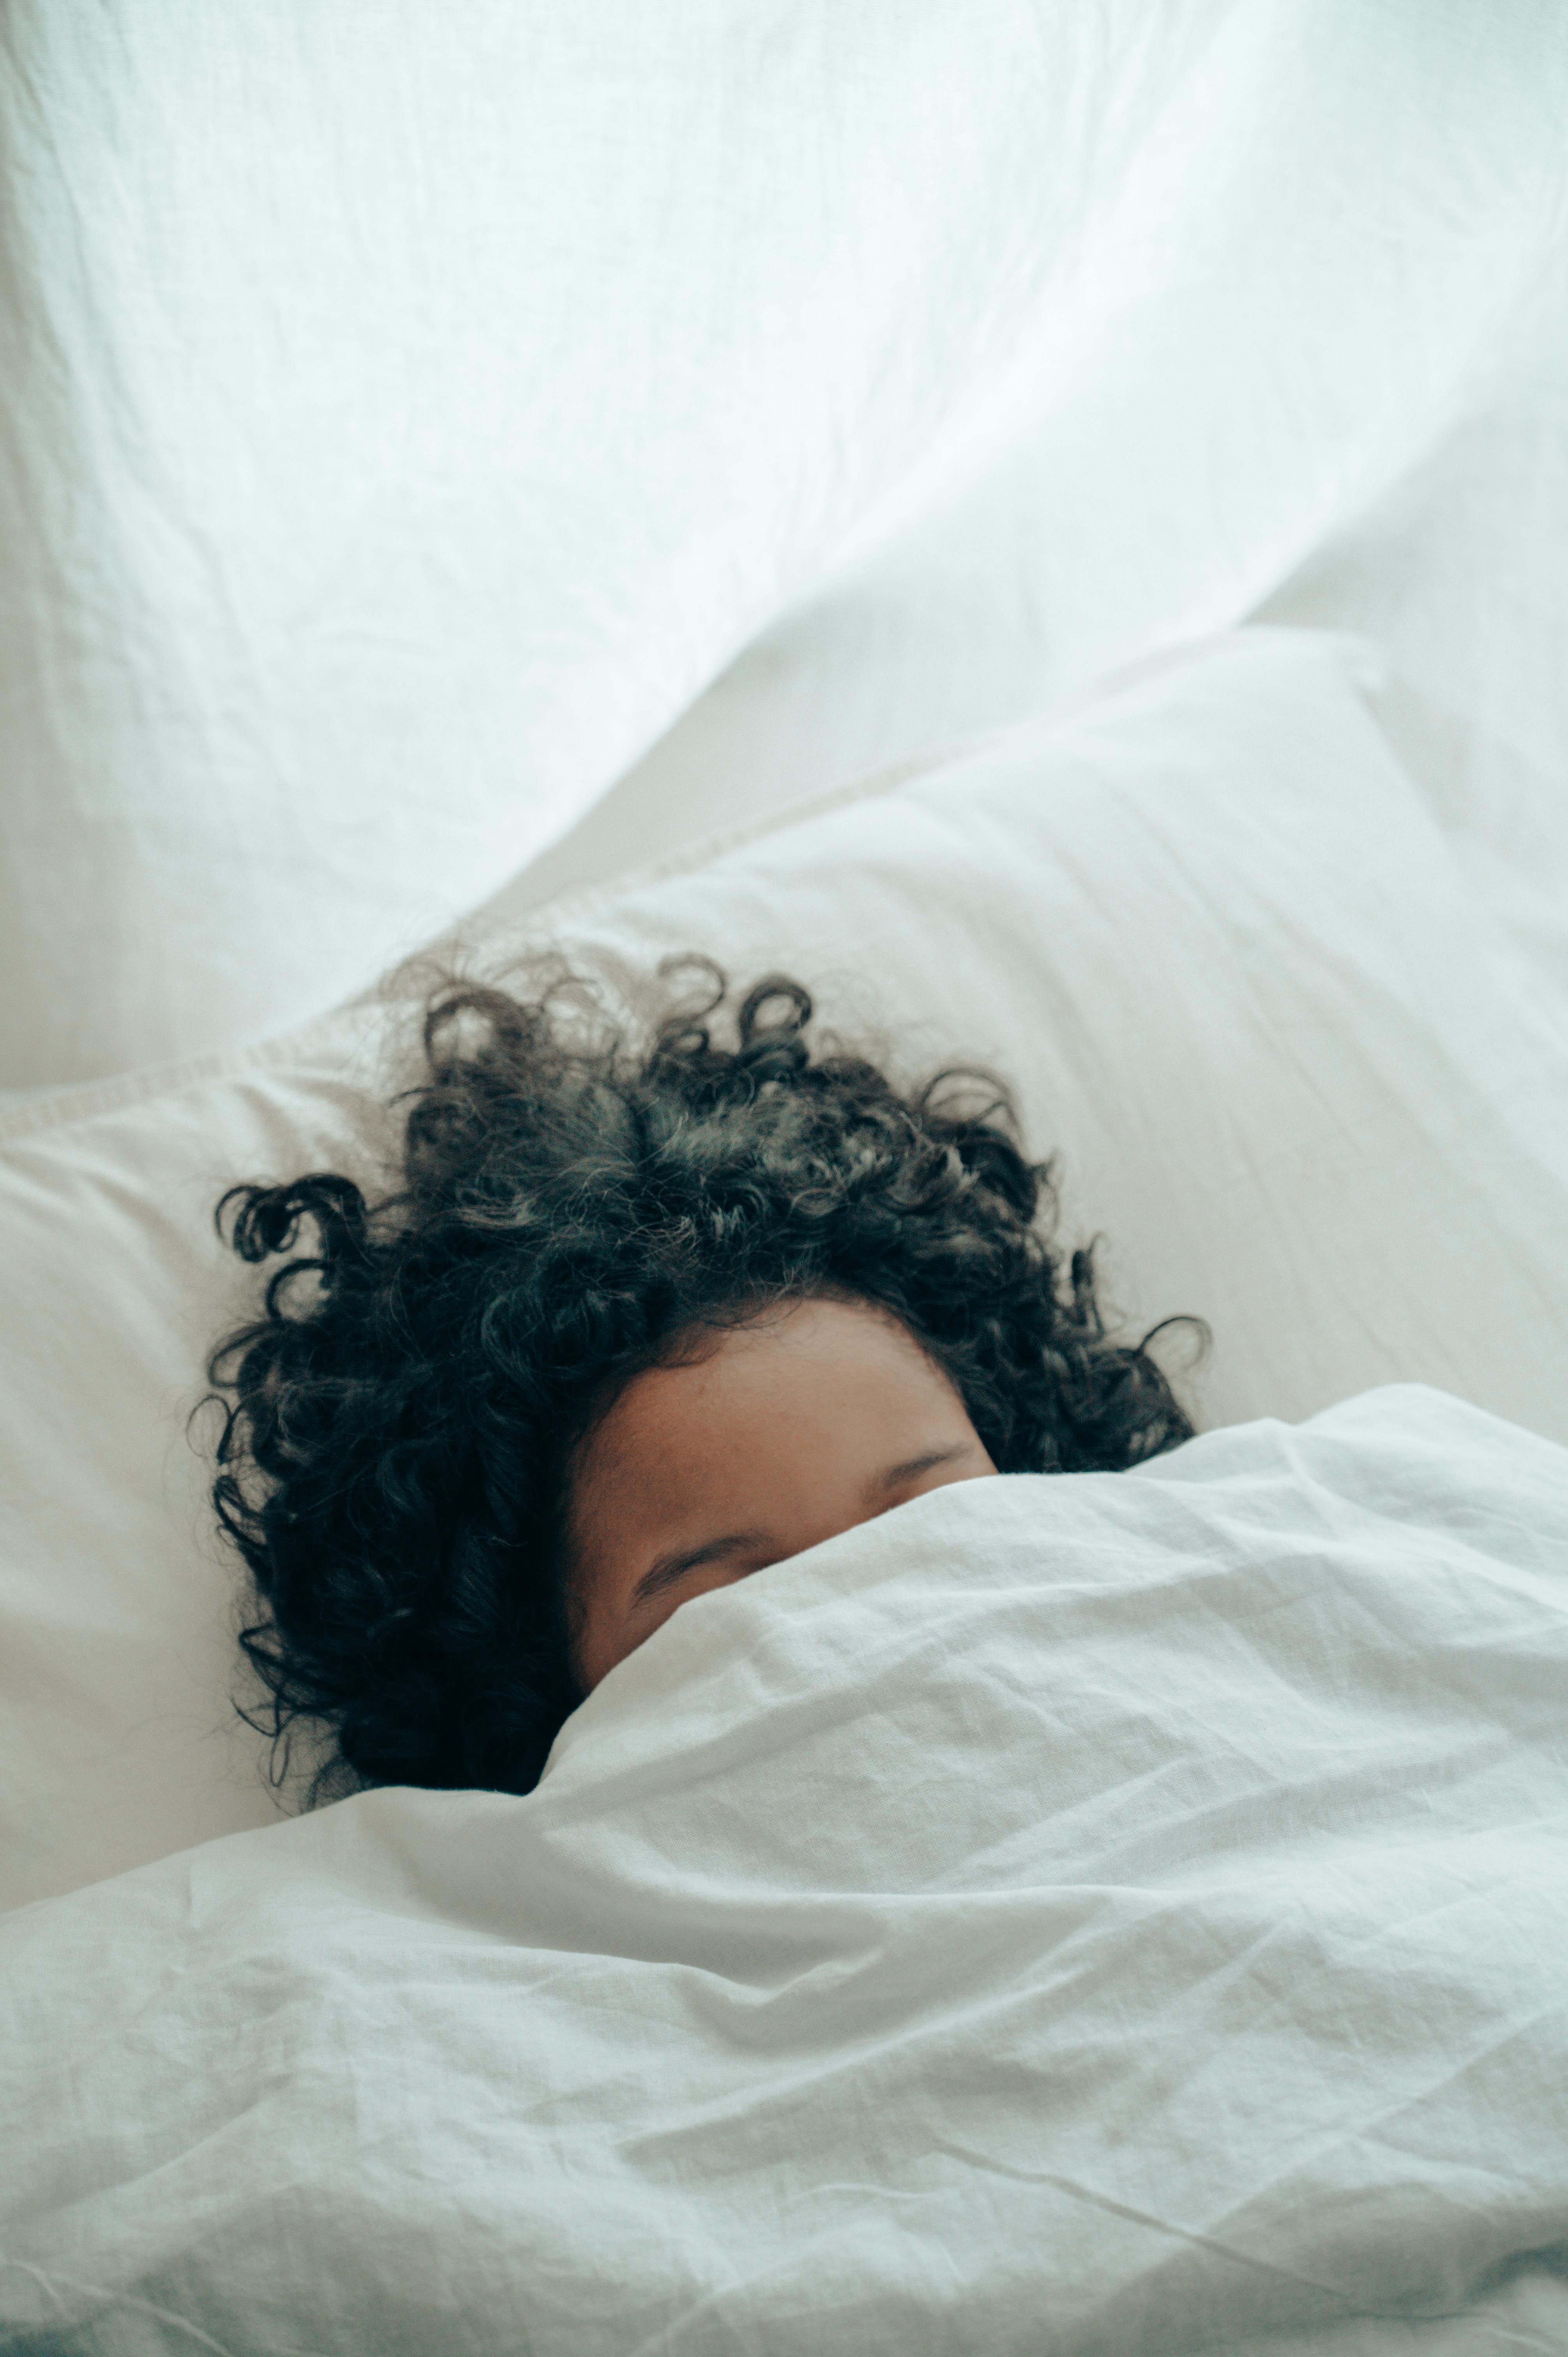 A child in bed ducking under the duvet | Source: Pexels